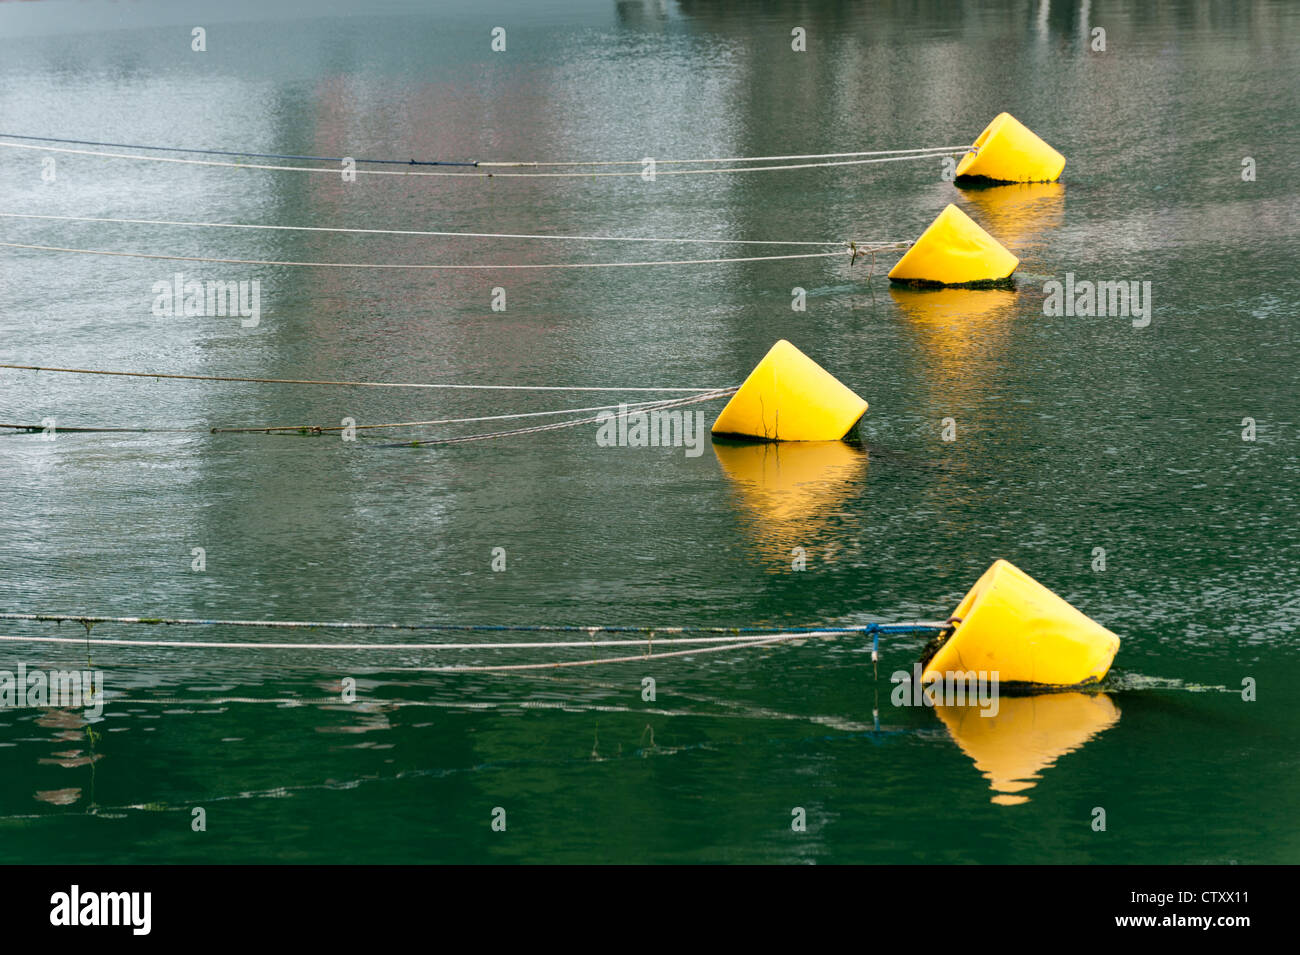 Yellow mooring buoys in a harbour set against the green colour of the water. Stock Photo